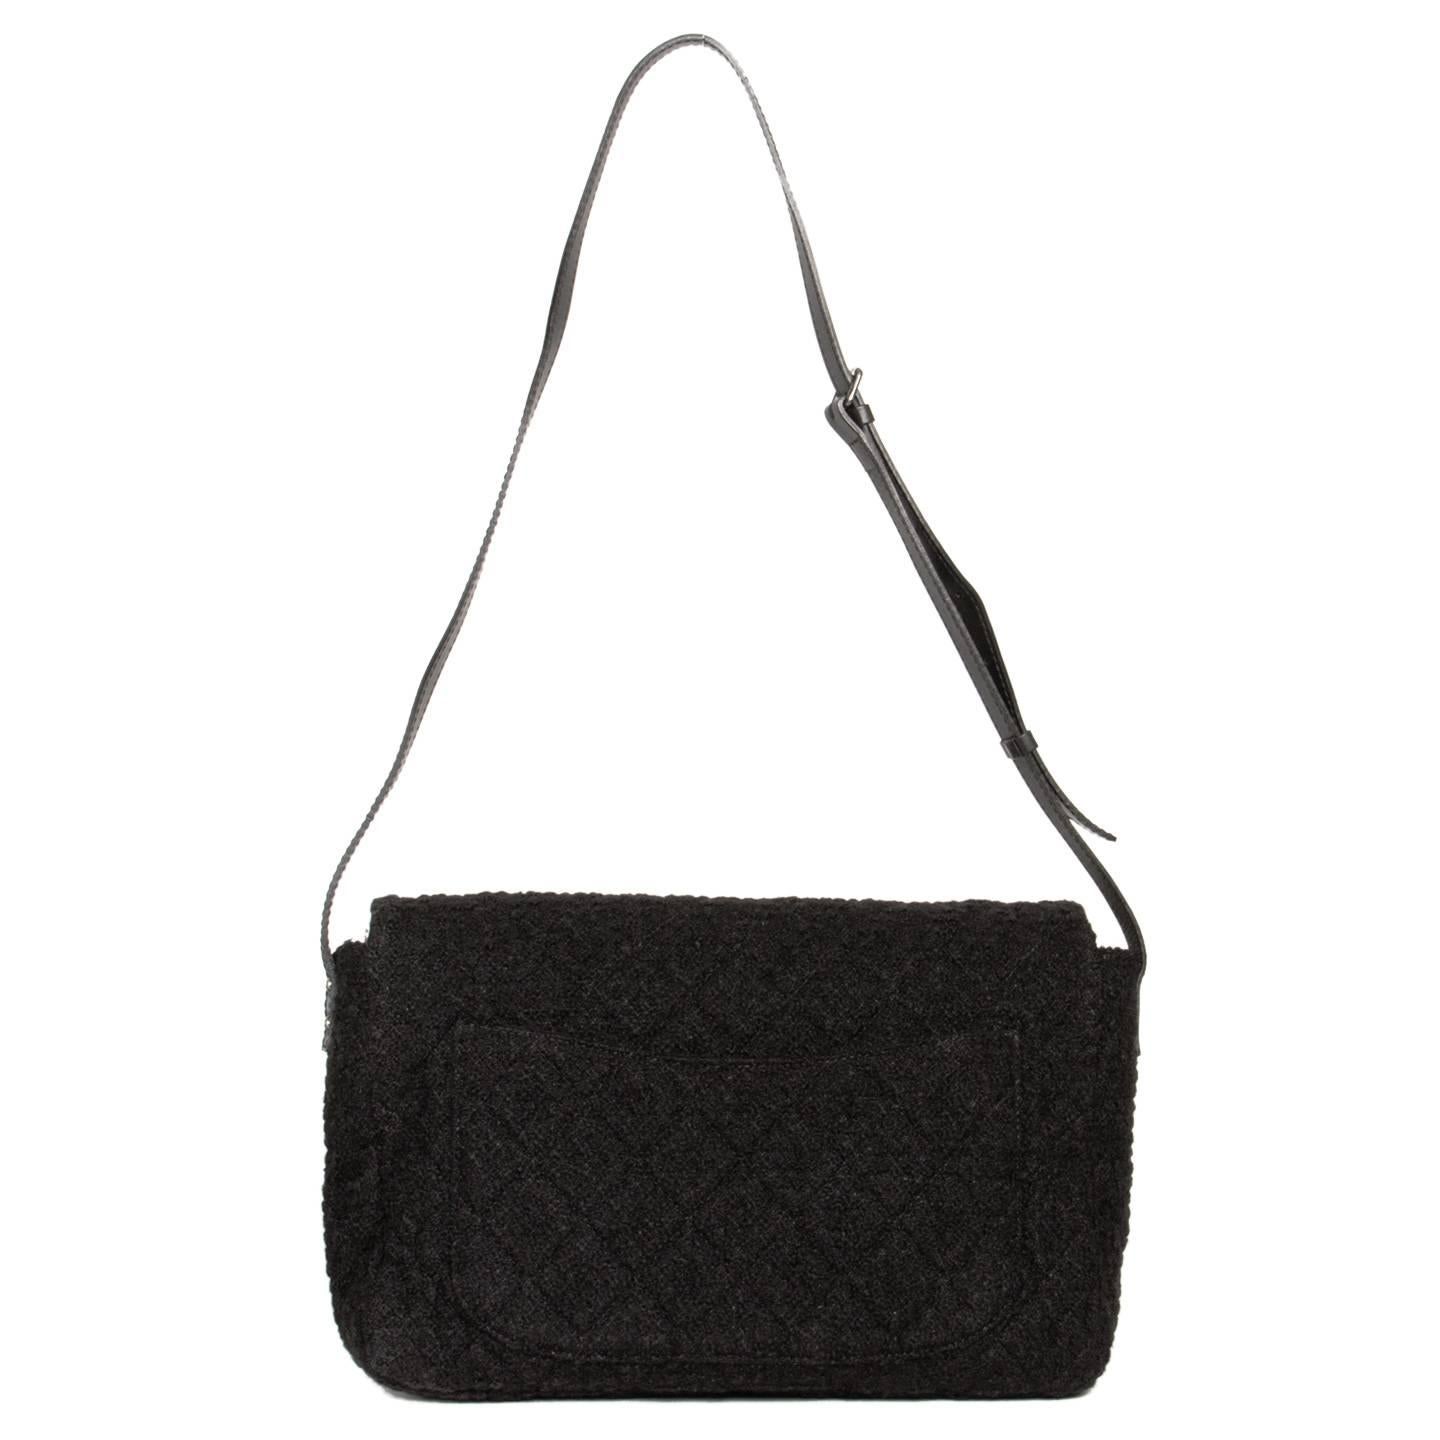 Large classic quilted Chanel style bag with a fun twist given by the black boucle wool. The bag has a black leather cross-body adjustable strap and fastens with a silver buckle. Made in France.

Size  H 11" L 18" W 5" STRAP 55.5"